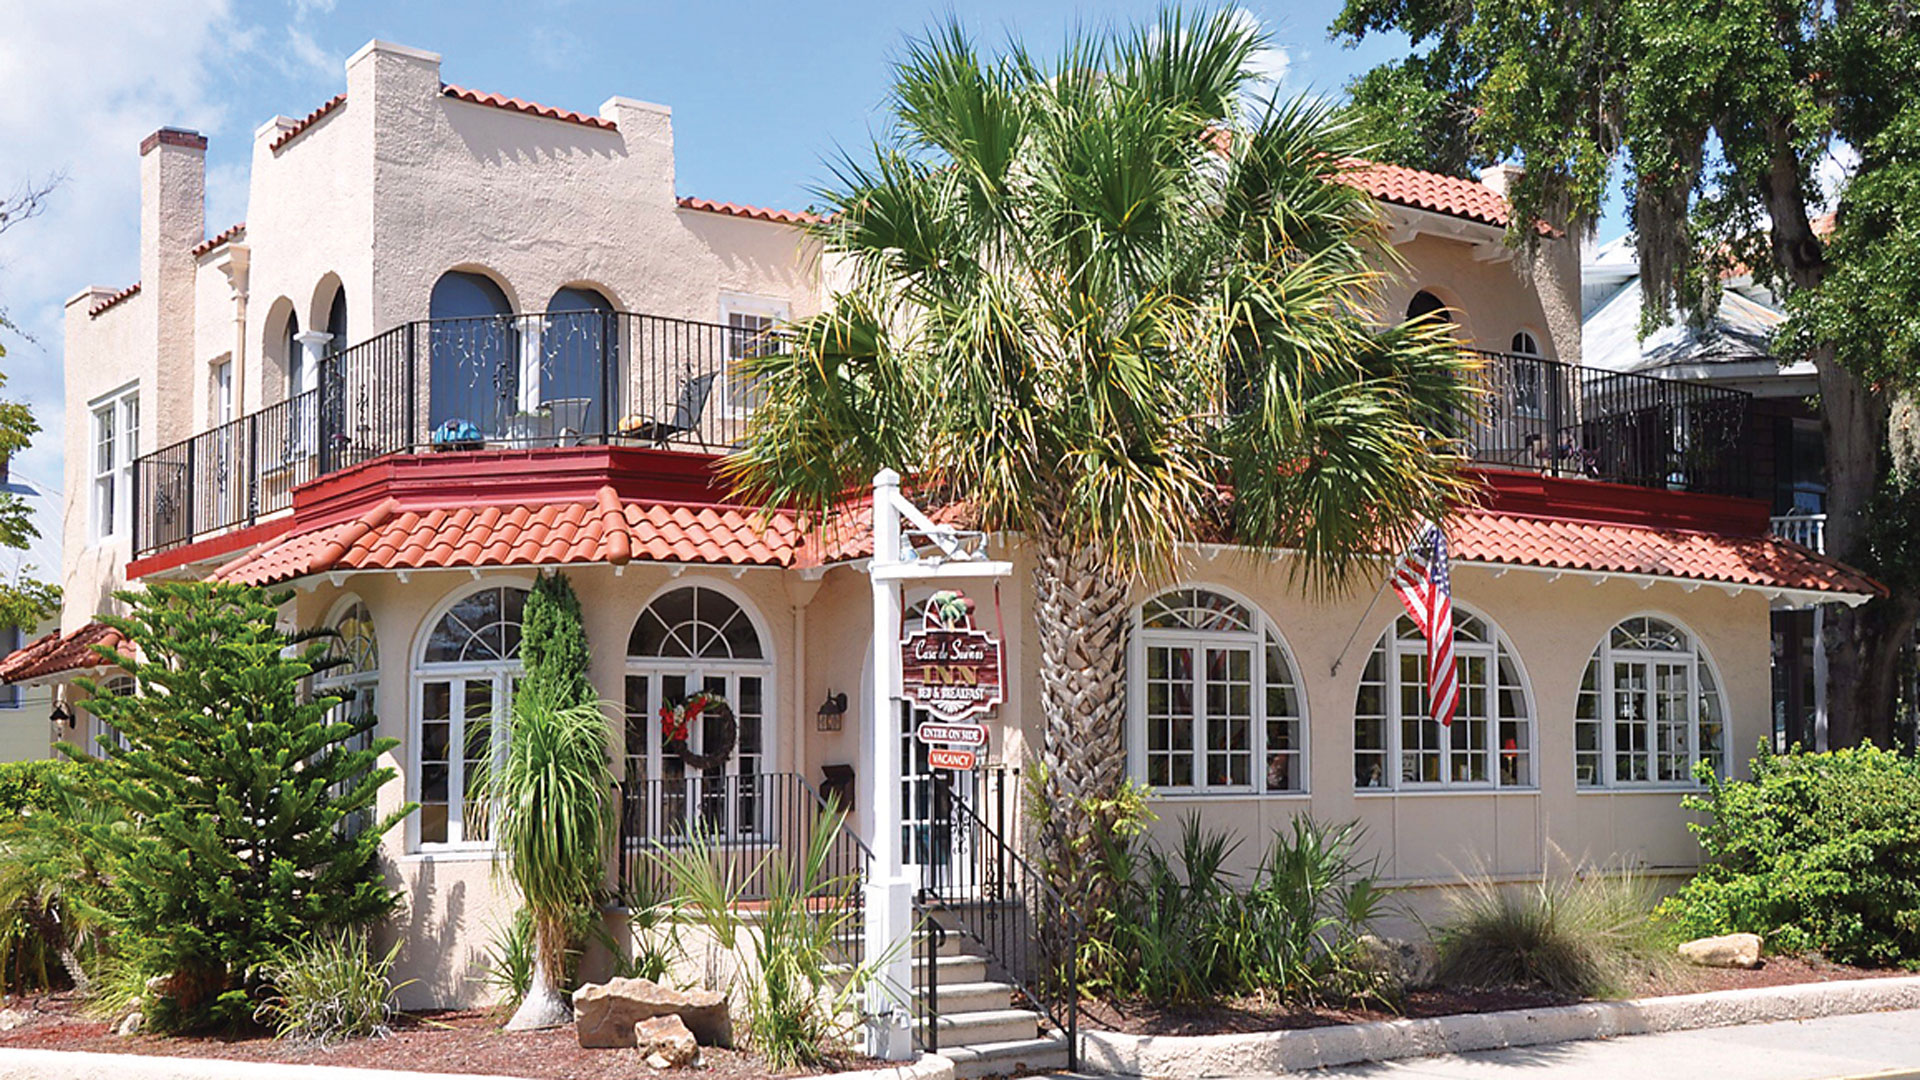 Escape to a city that feels like Europe when you stay at Casa De Suenos in St. Augustine.